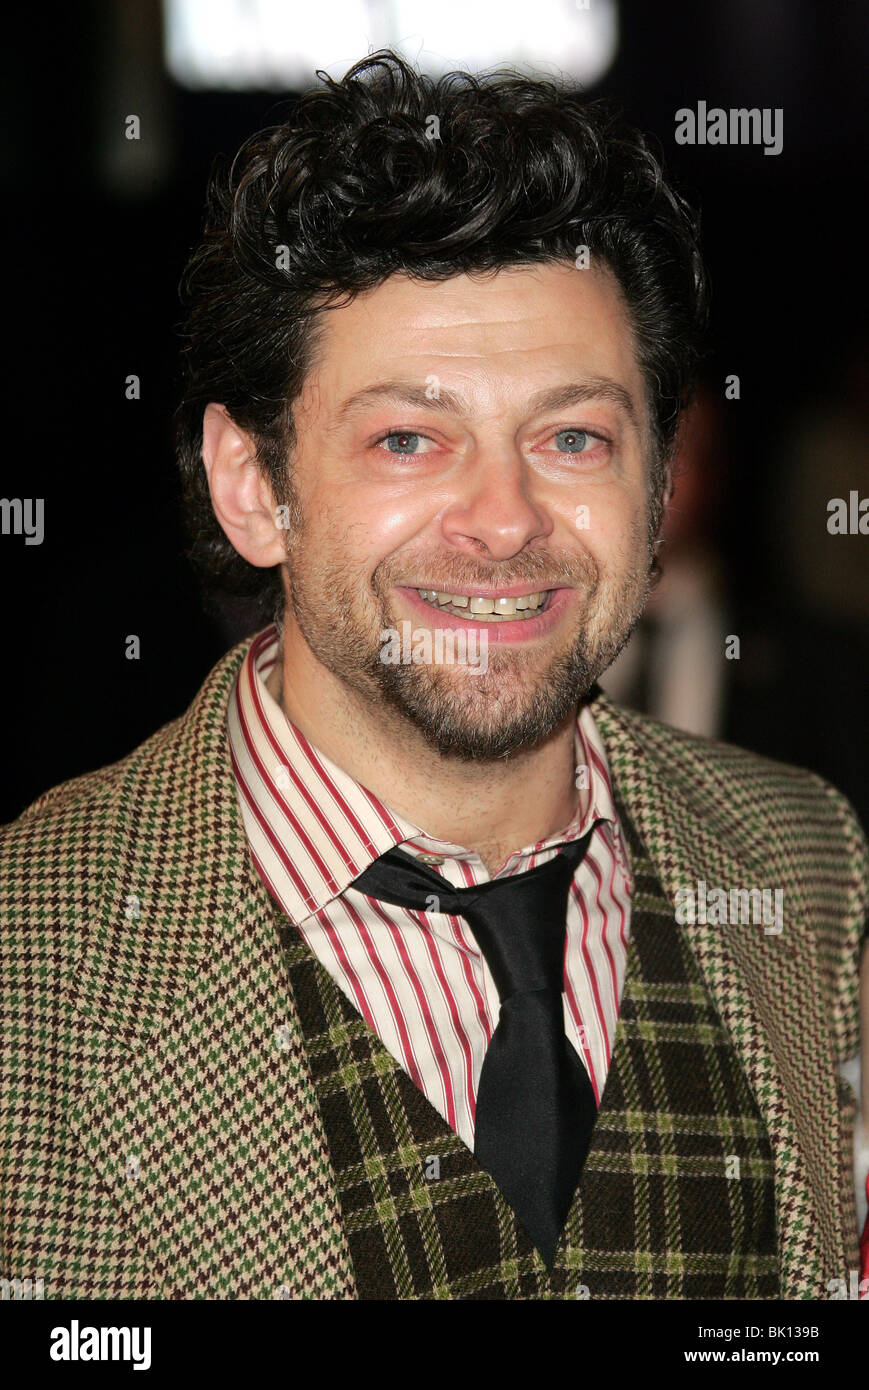 ANDY SERKIS KING KONG FILM PREMIER ODEON LEICESTER SQUARE LONDON ENGLAND 08 December 2005 Stock Photo